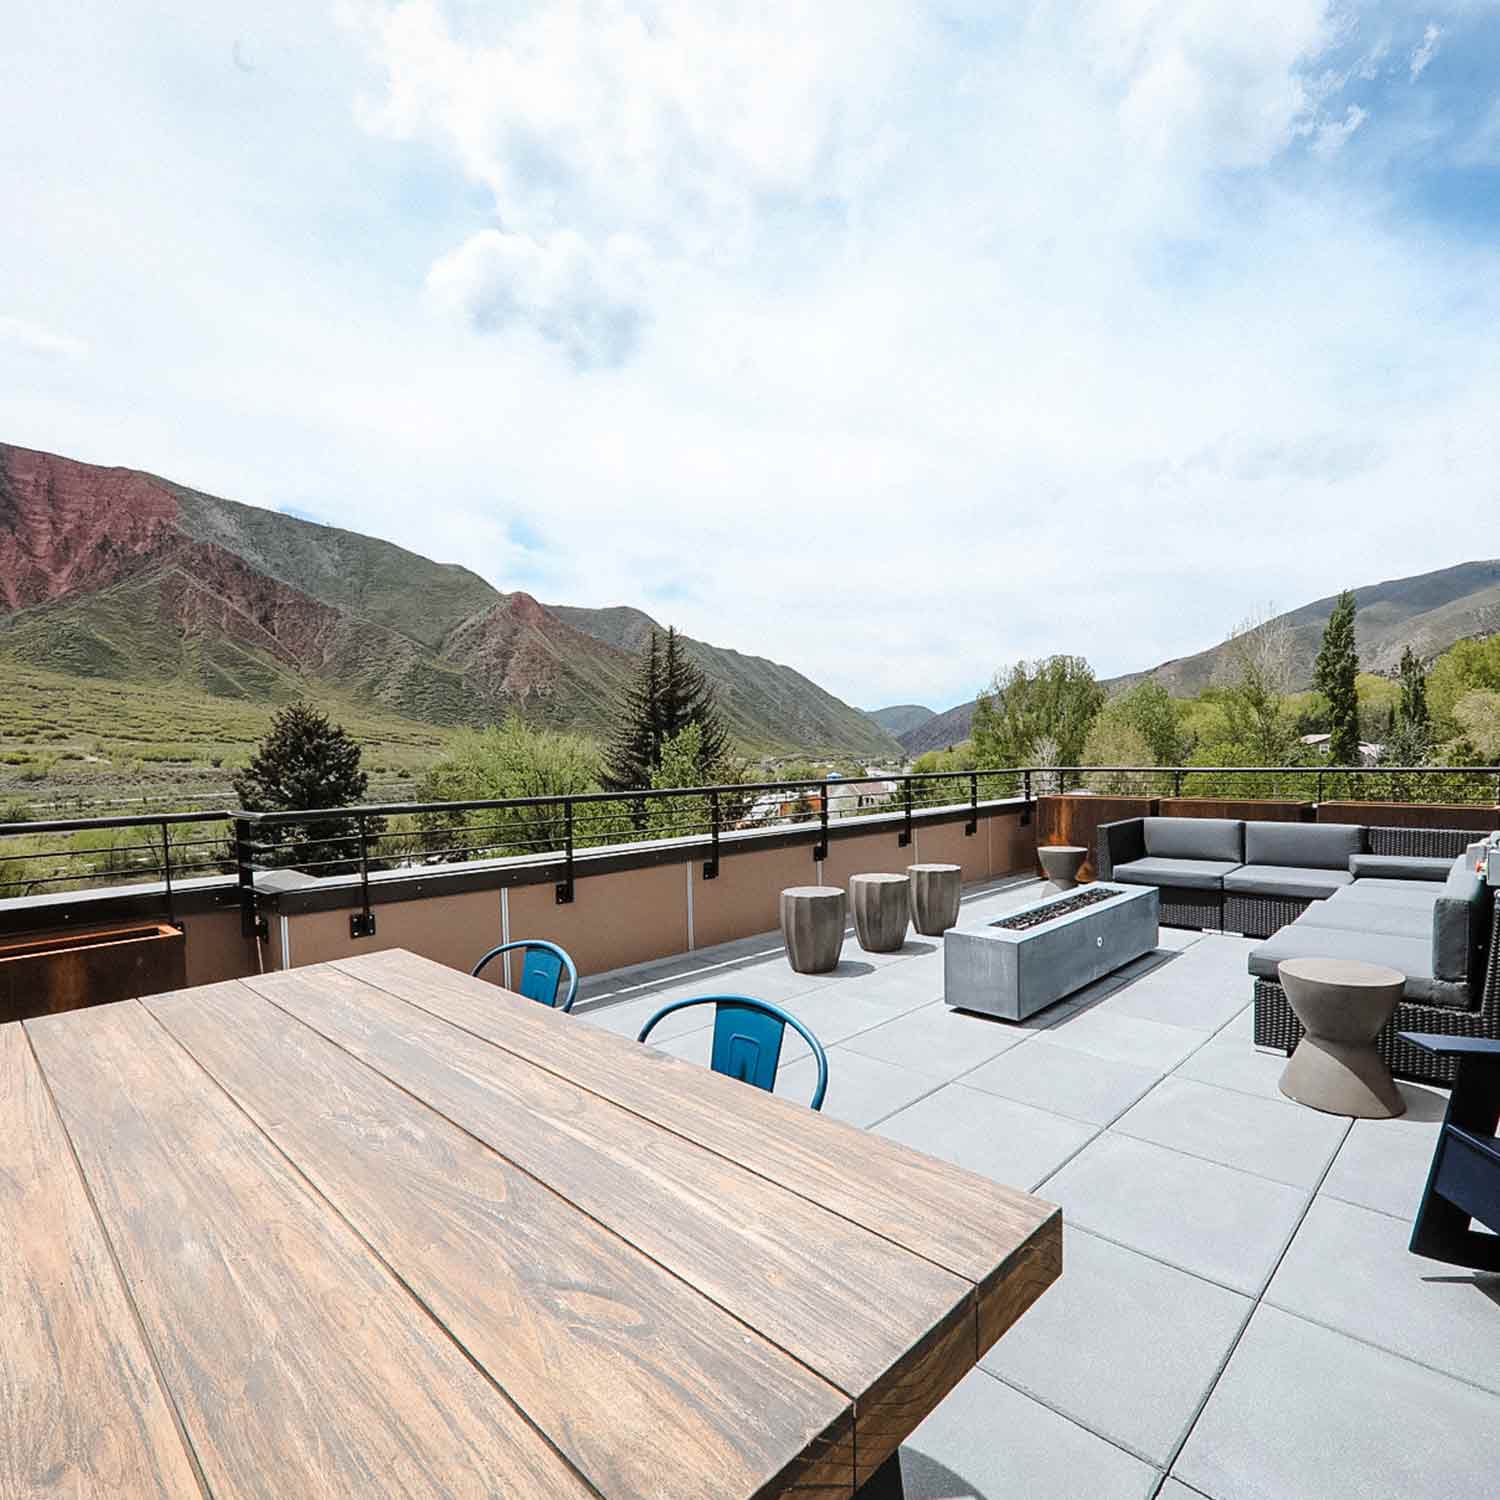 View from the rooftop patio of an apartment building in Glenwood Springs